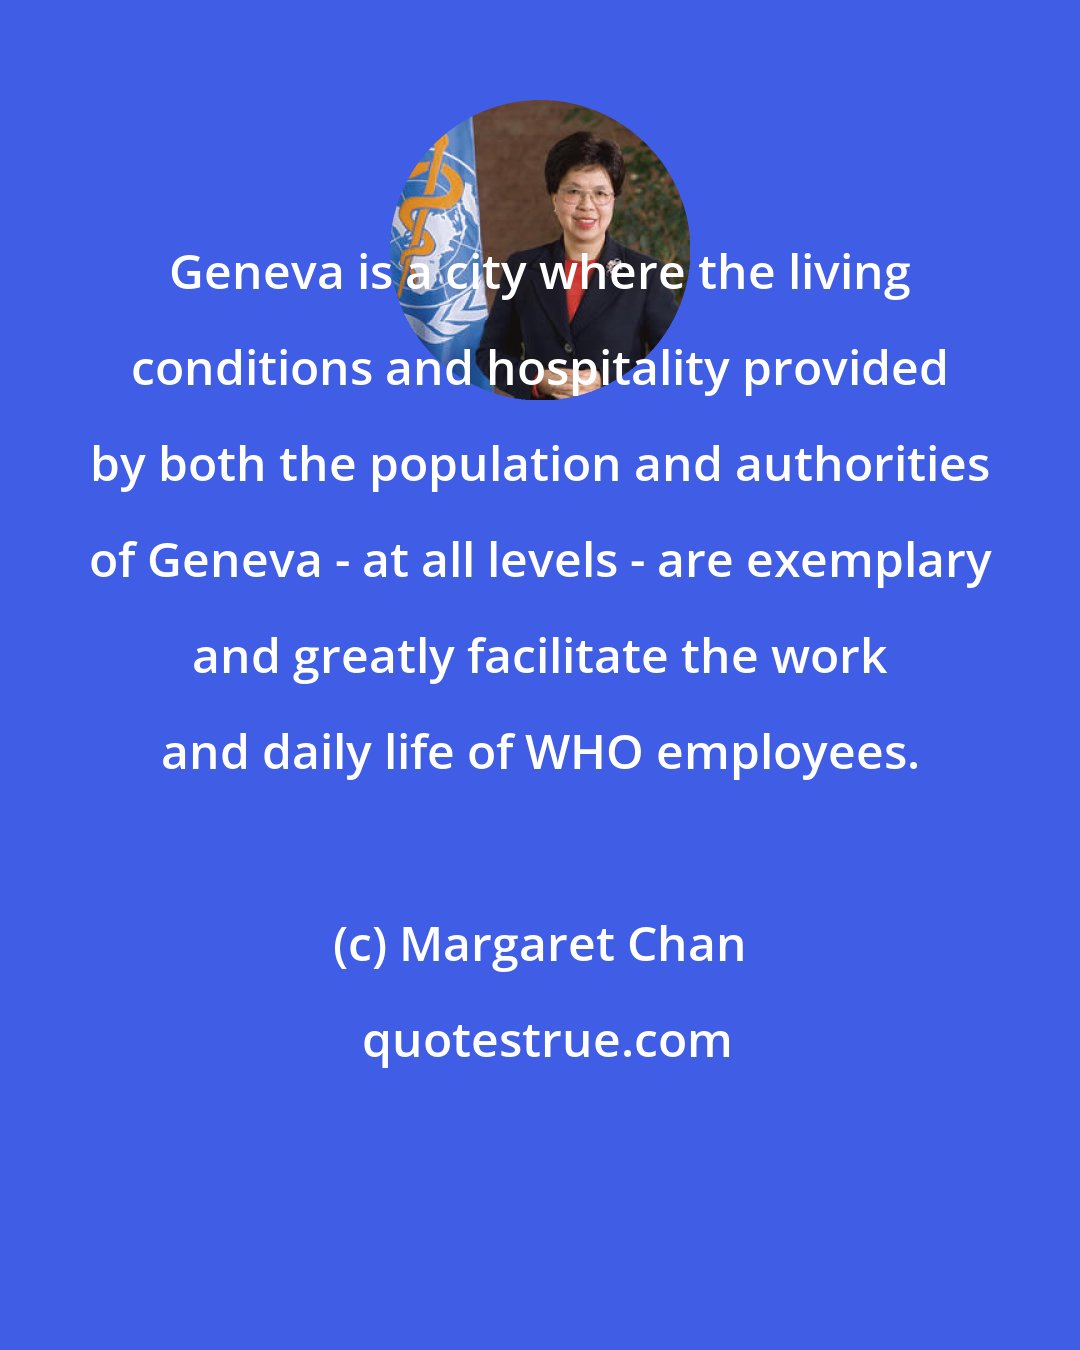 Margaret Chan: Geneva is a city where the living conditions and hospitality provided by both the population and authorities of Geneva - at all levels - are exemplary and greatly facilitate the work and daily life of WHO employees.